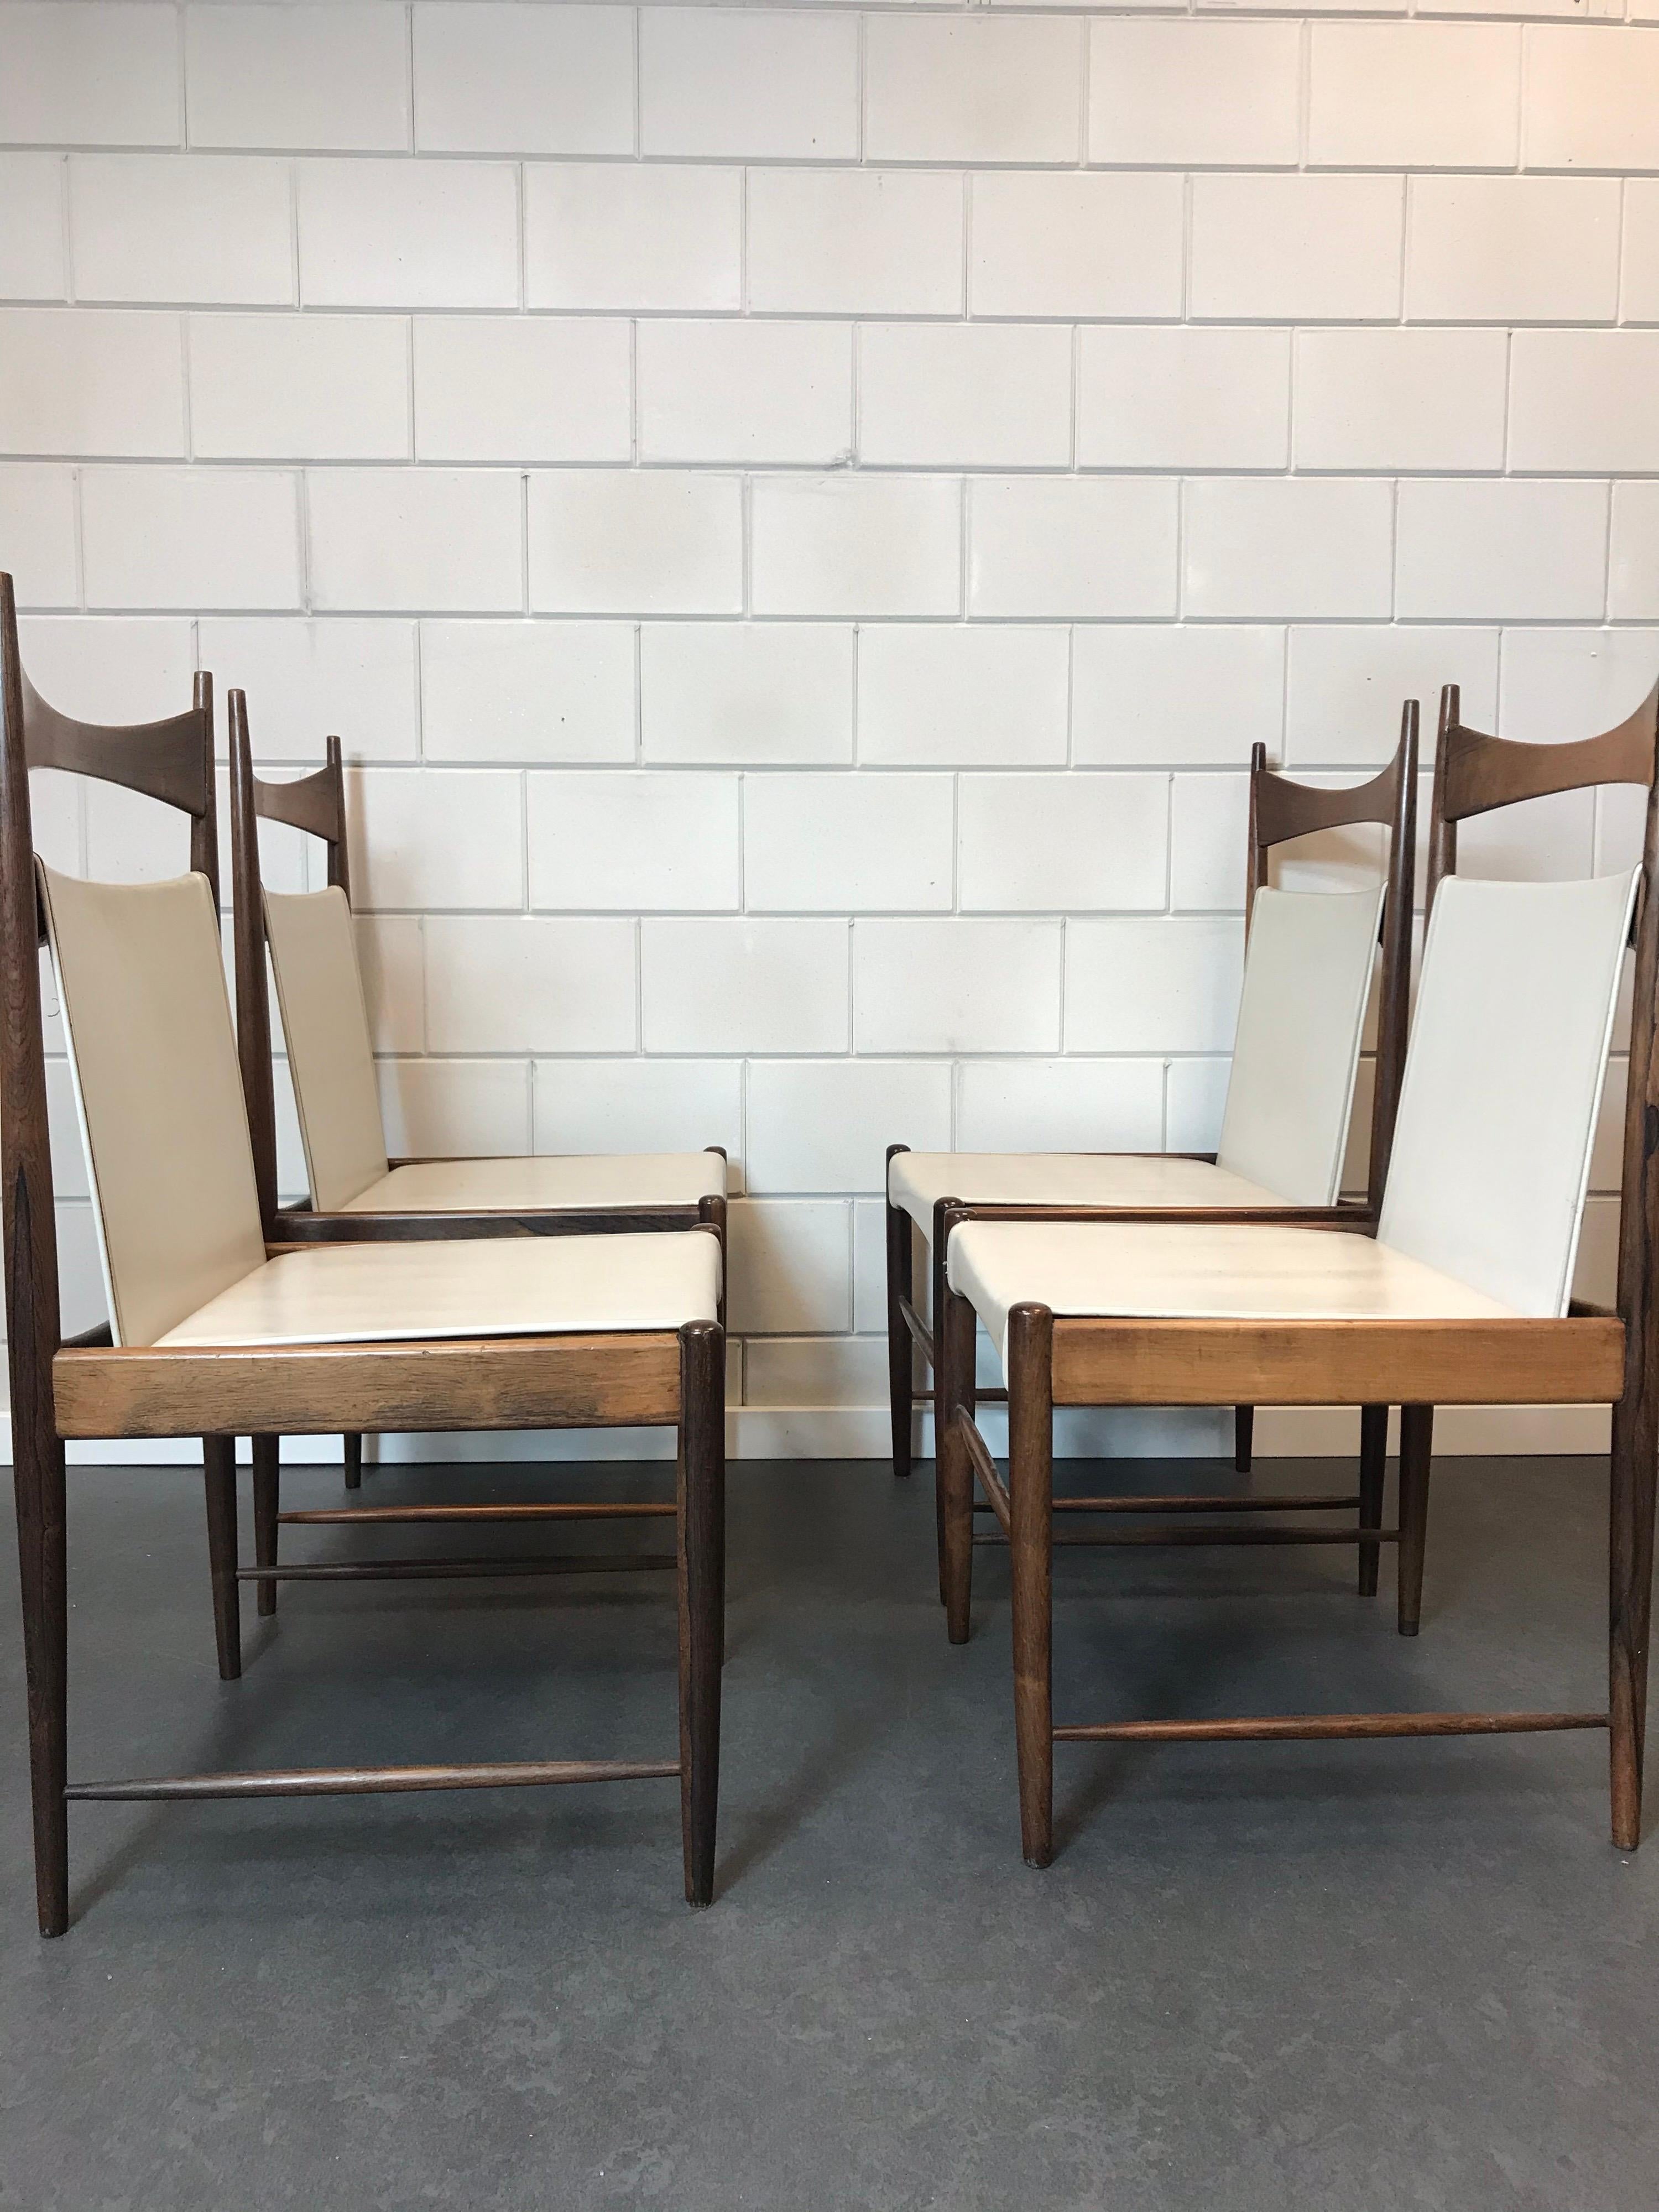 Set of 4 Brazilian rosewood dining chairs design 1959 by Sergio Rodrigues
The chairs are in good vintage condition.